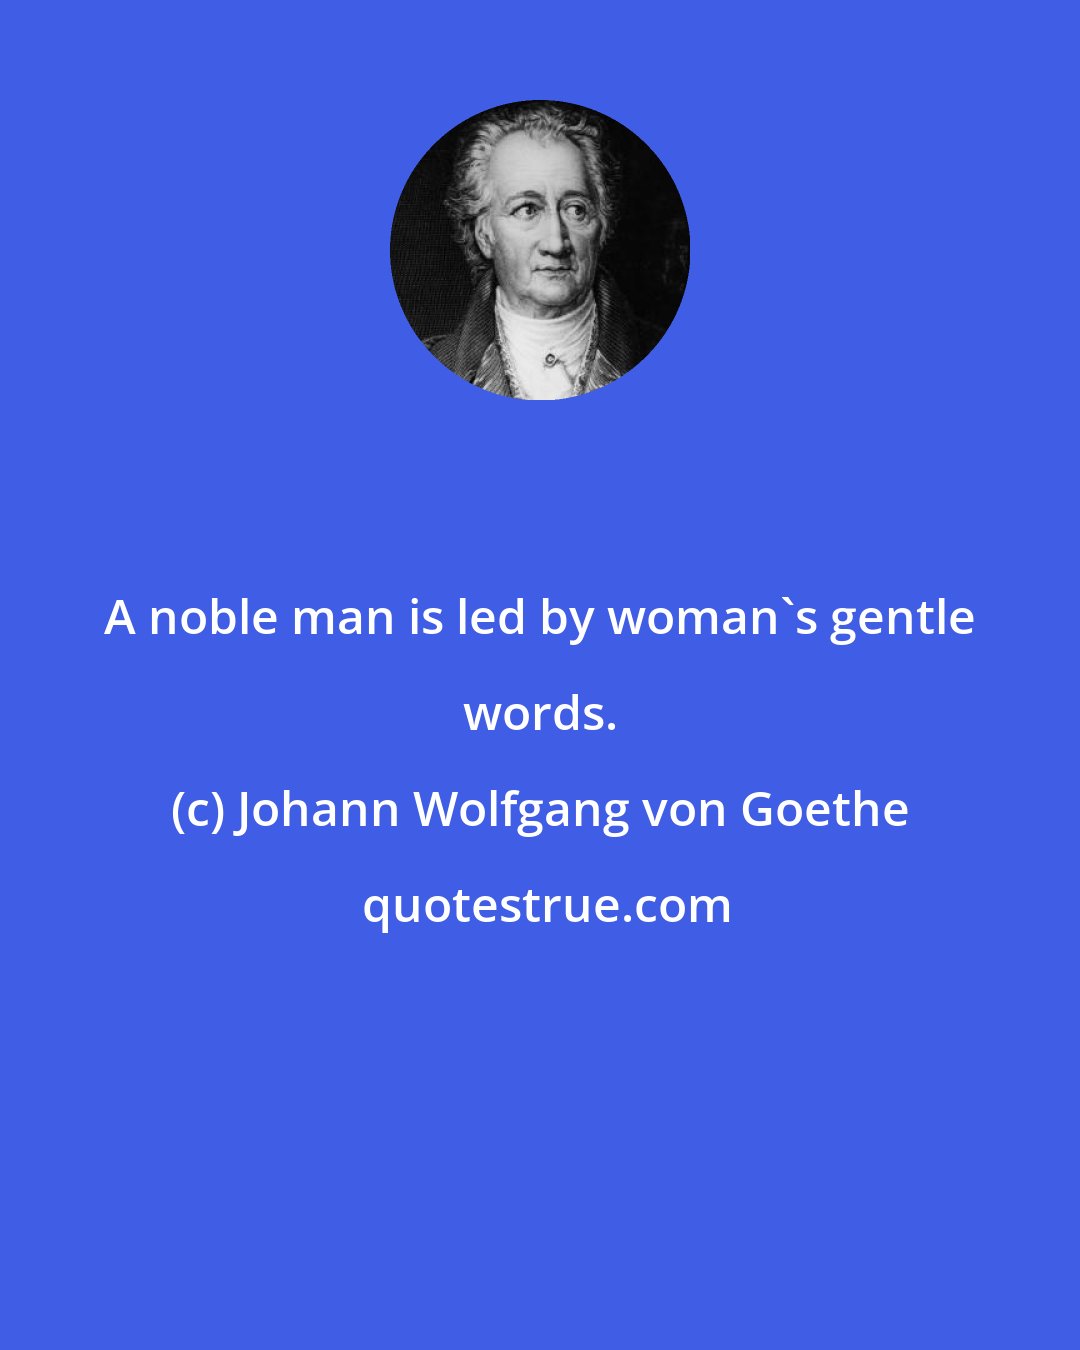 Johann Wolfgang von Goethe: A noble man is led by woman's gentle words.